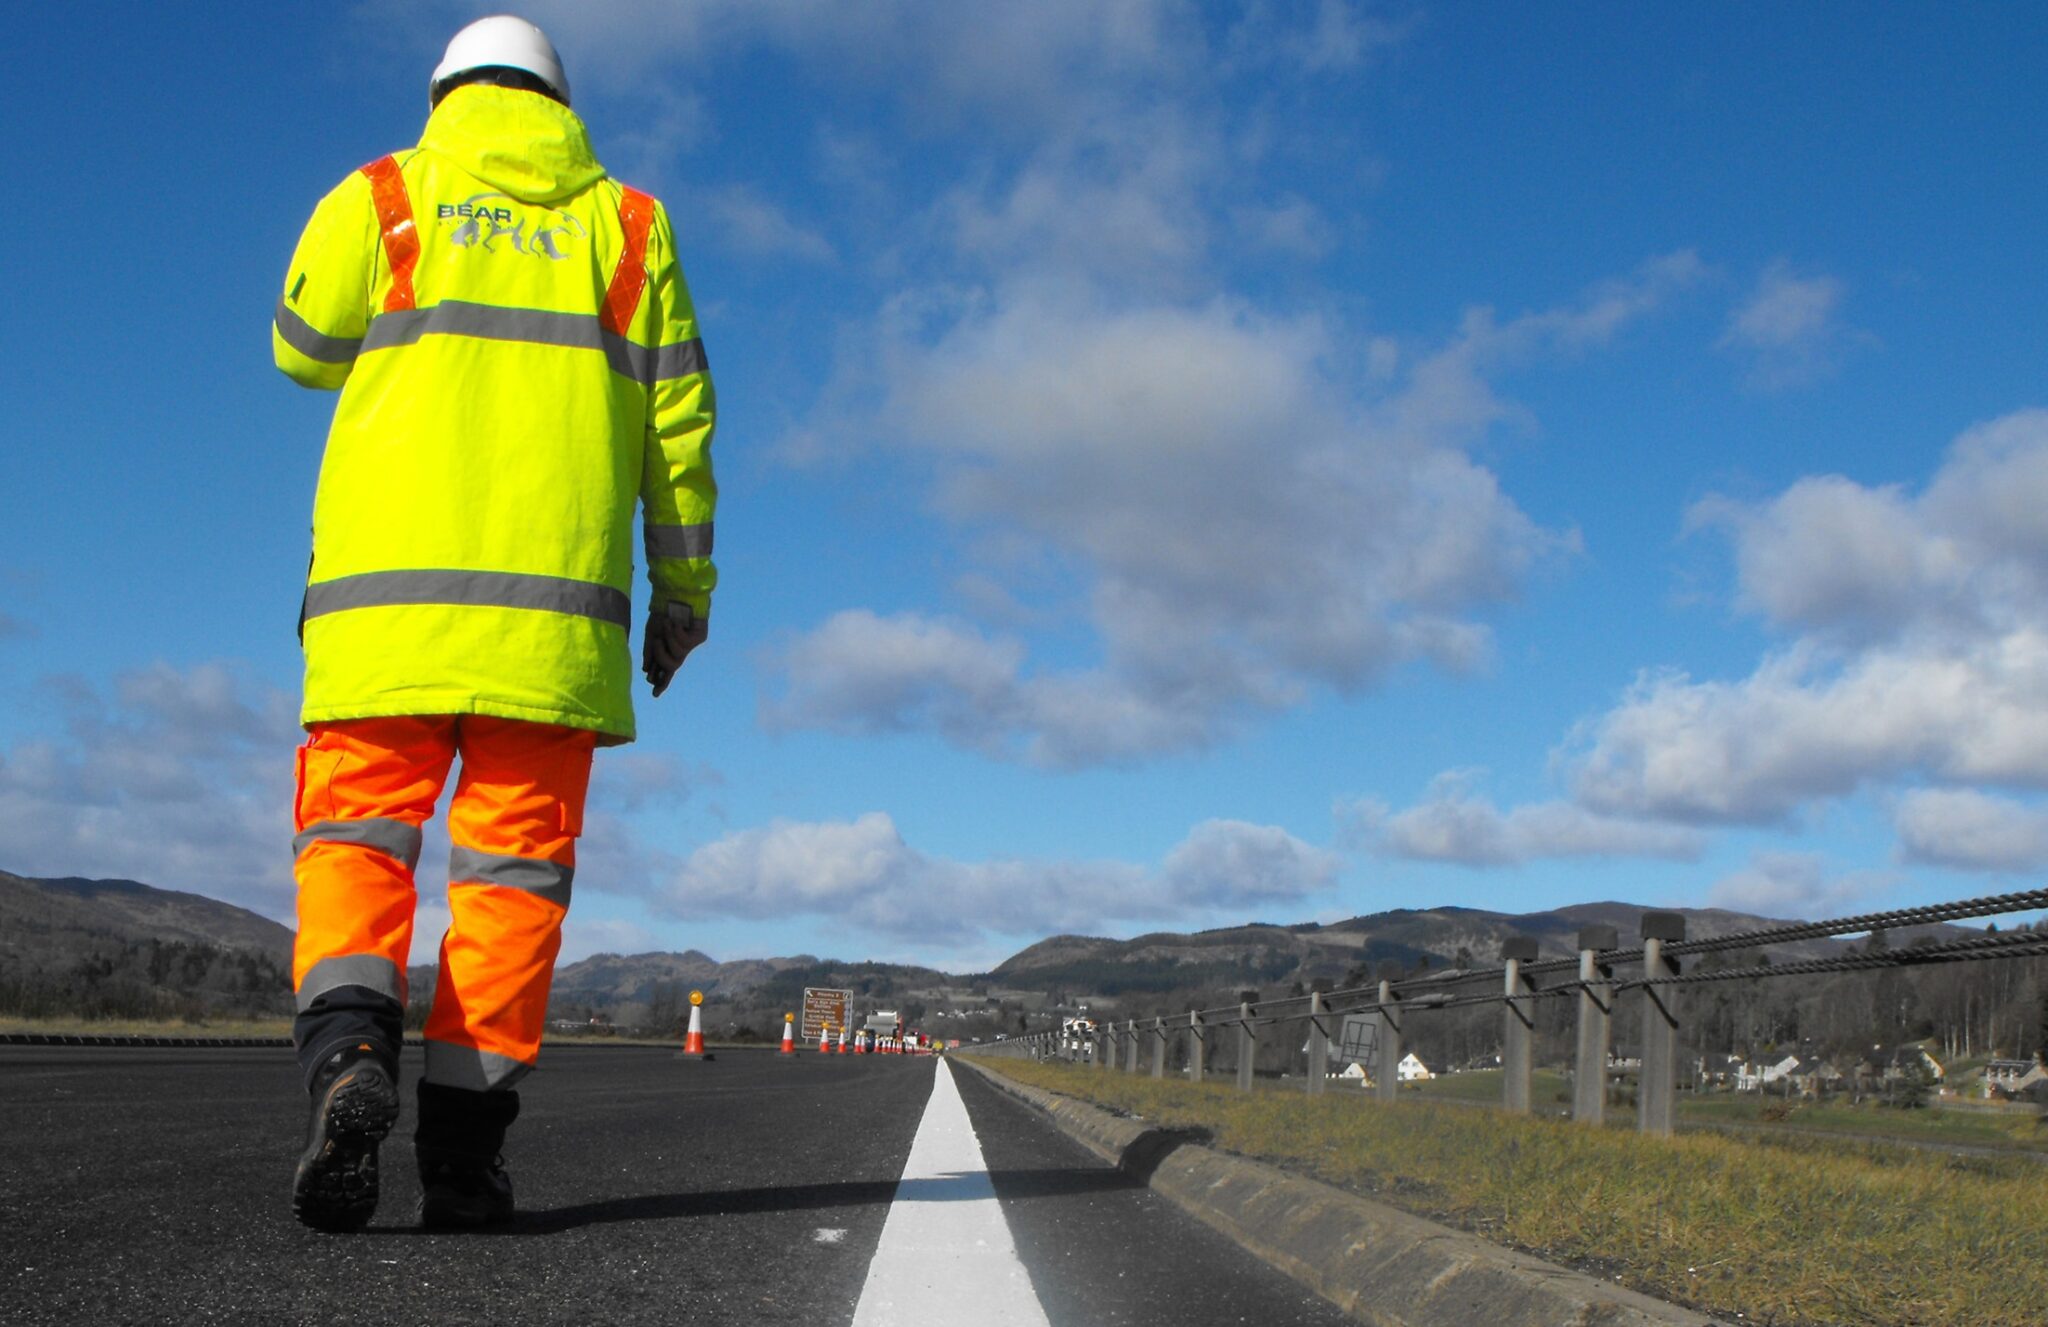 UPDATE: RESURFACING THE A9 AT SKIACH SERVICES